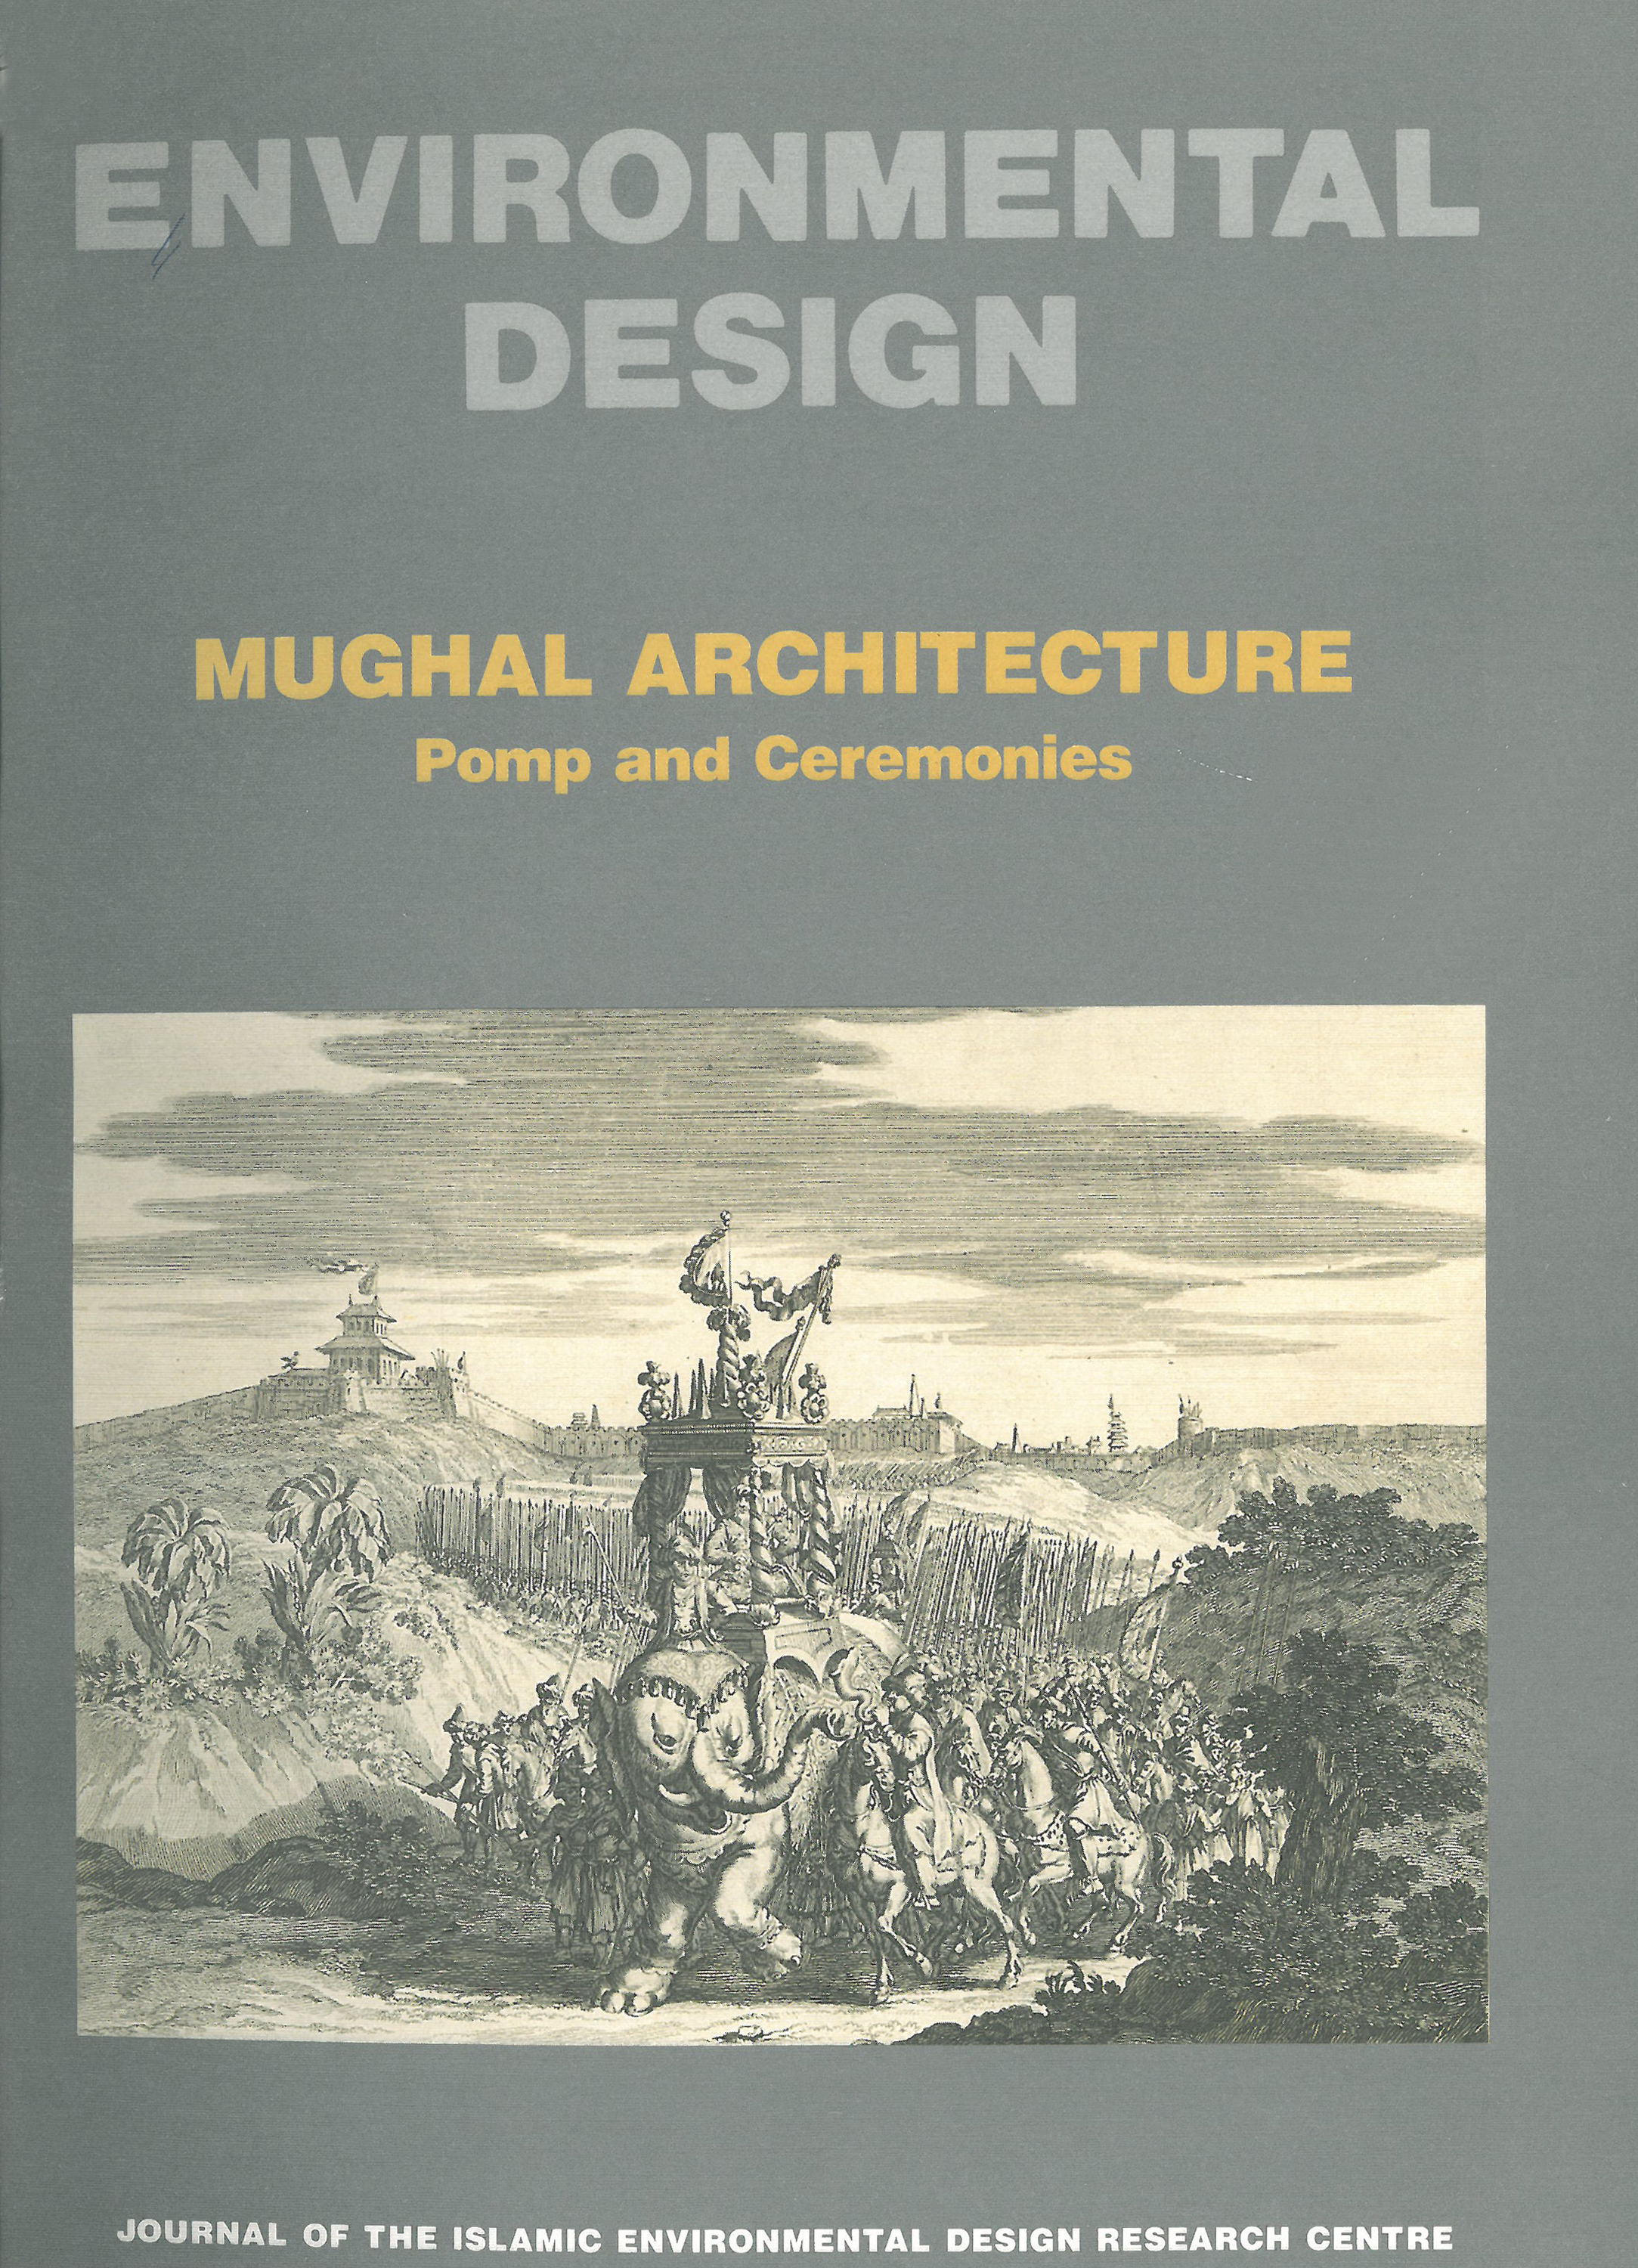 Environmental Design: Mughal Architecture, Pomp and Ceremonies